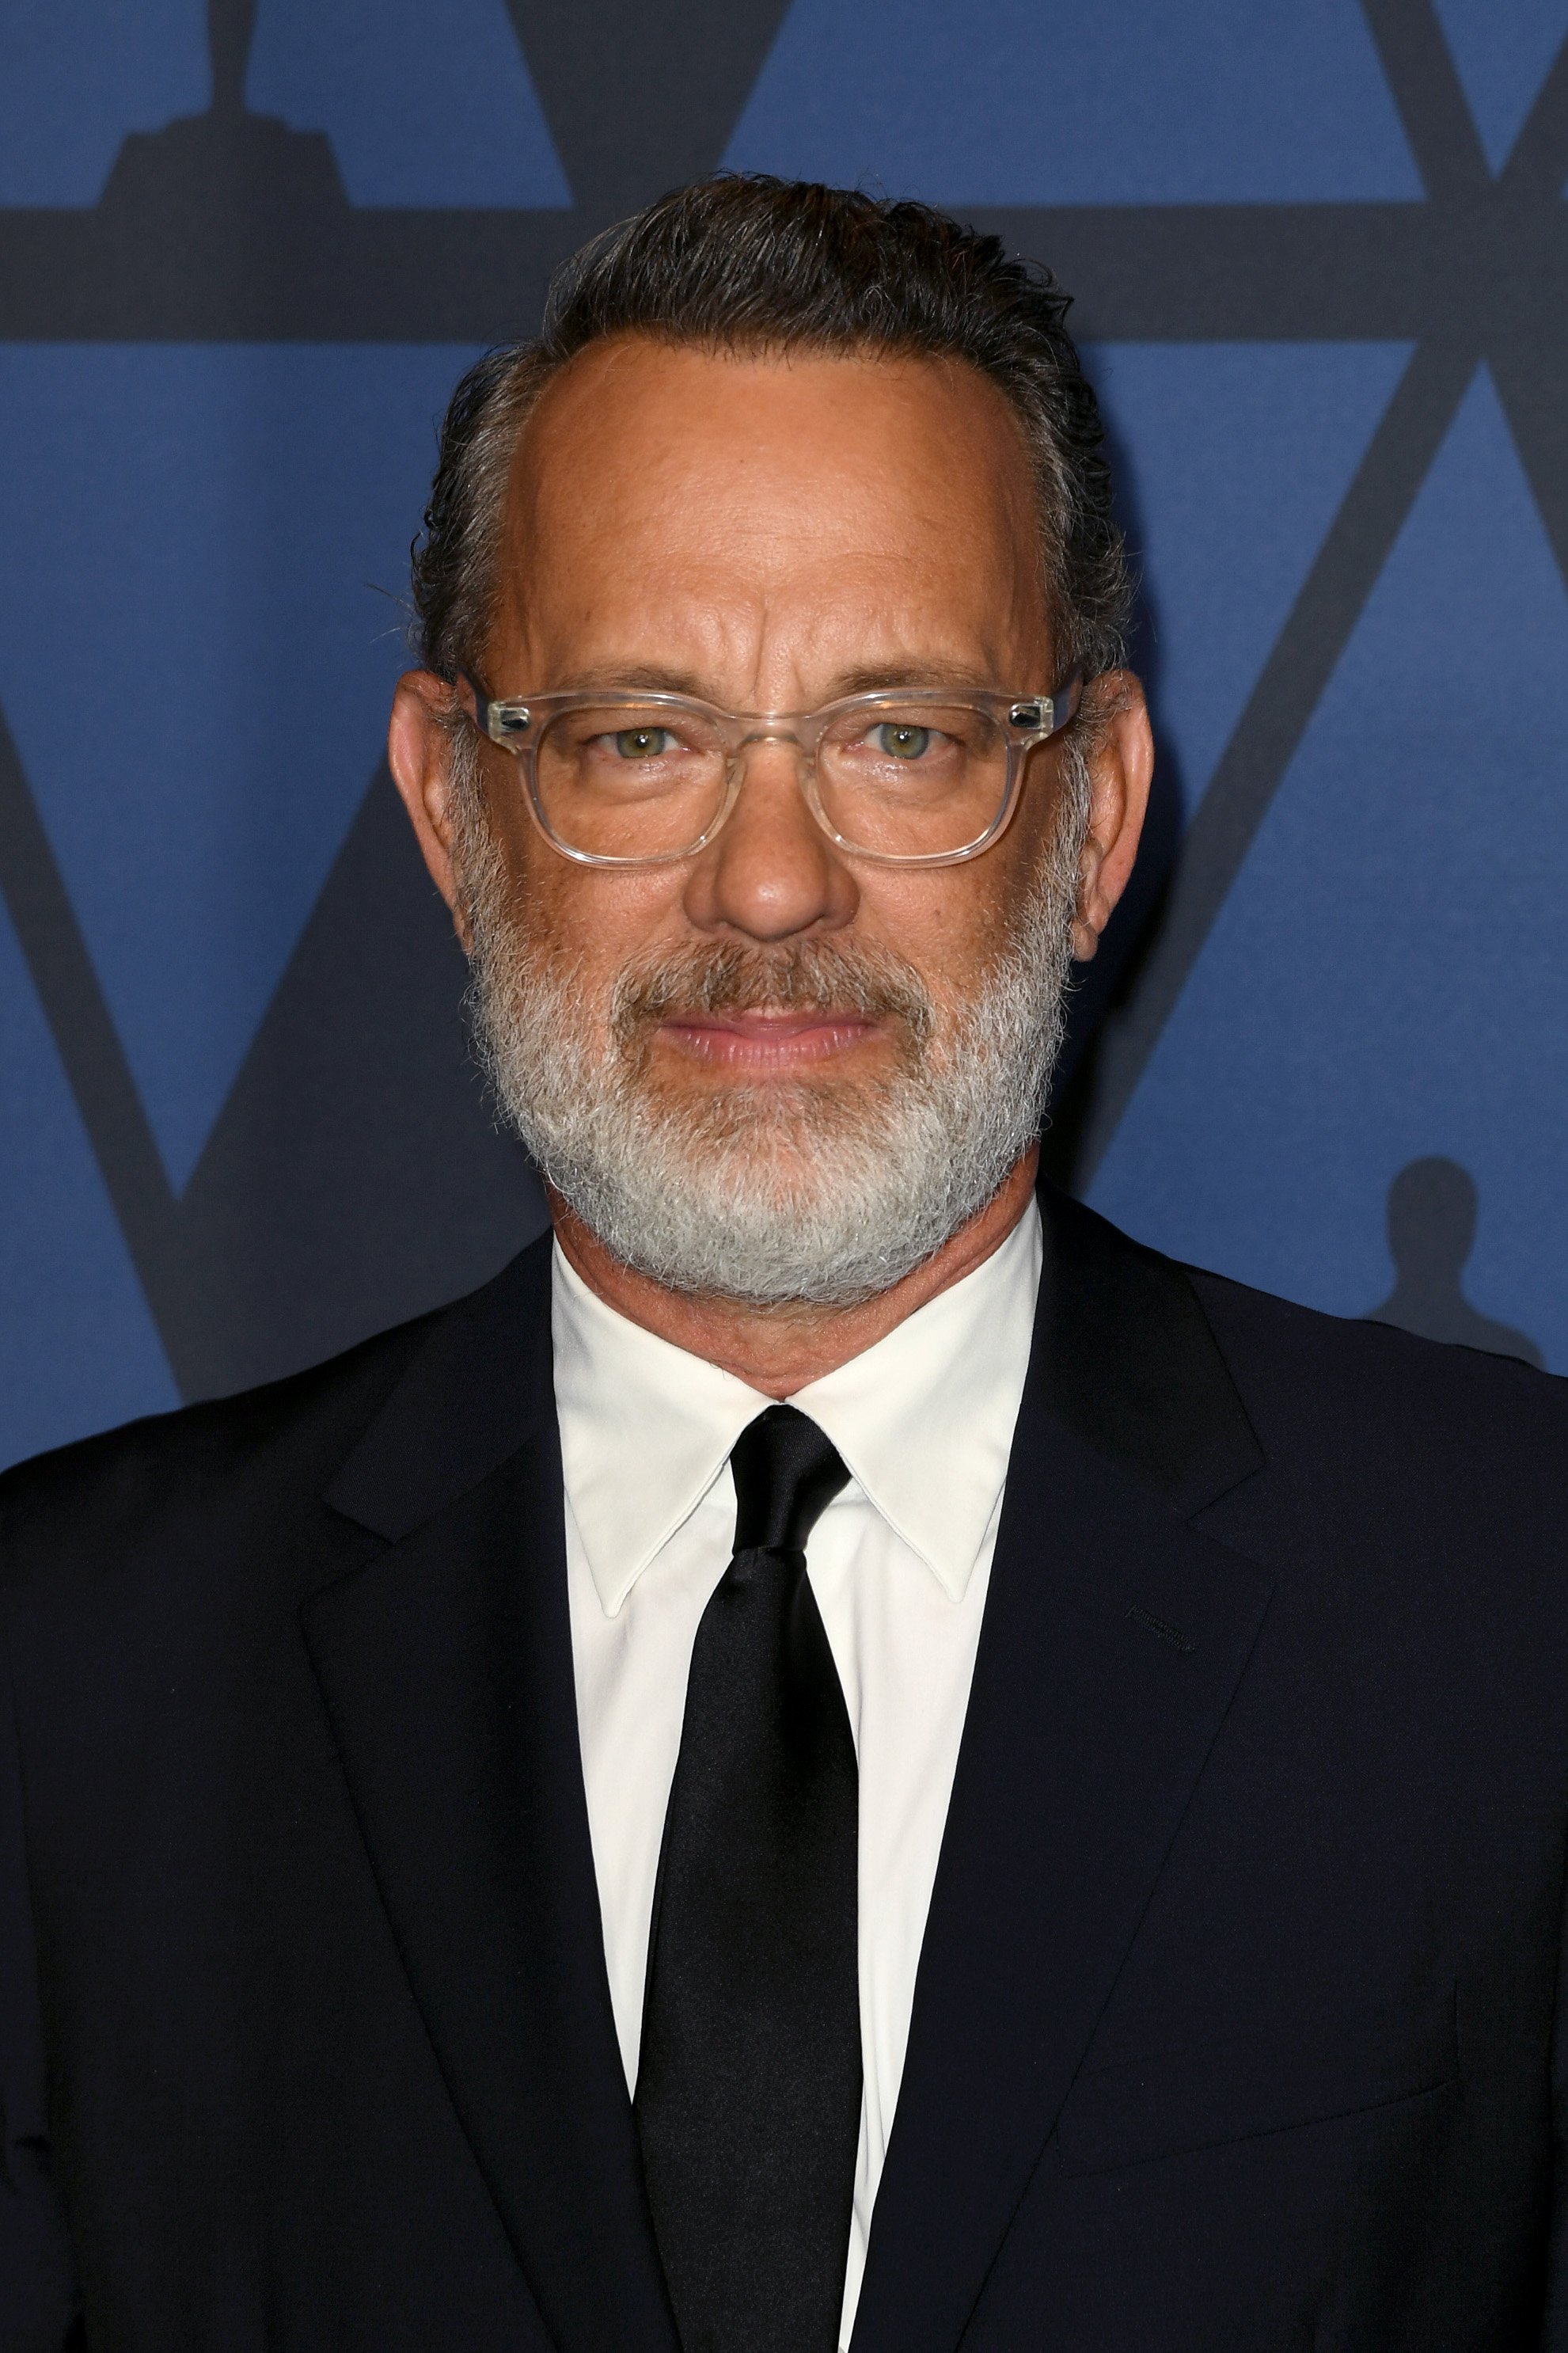 Tom Hanks at the Academy Of Motion Picture Arts And Sciences' 11th Annual Governors Awards | Source: Getty Images